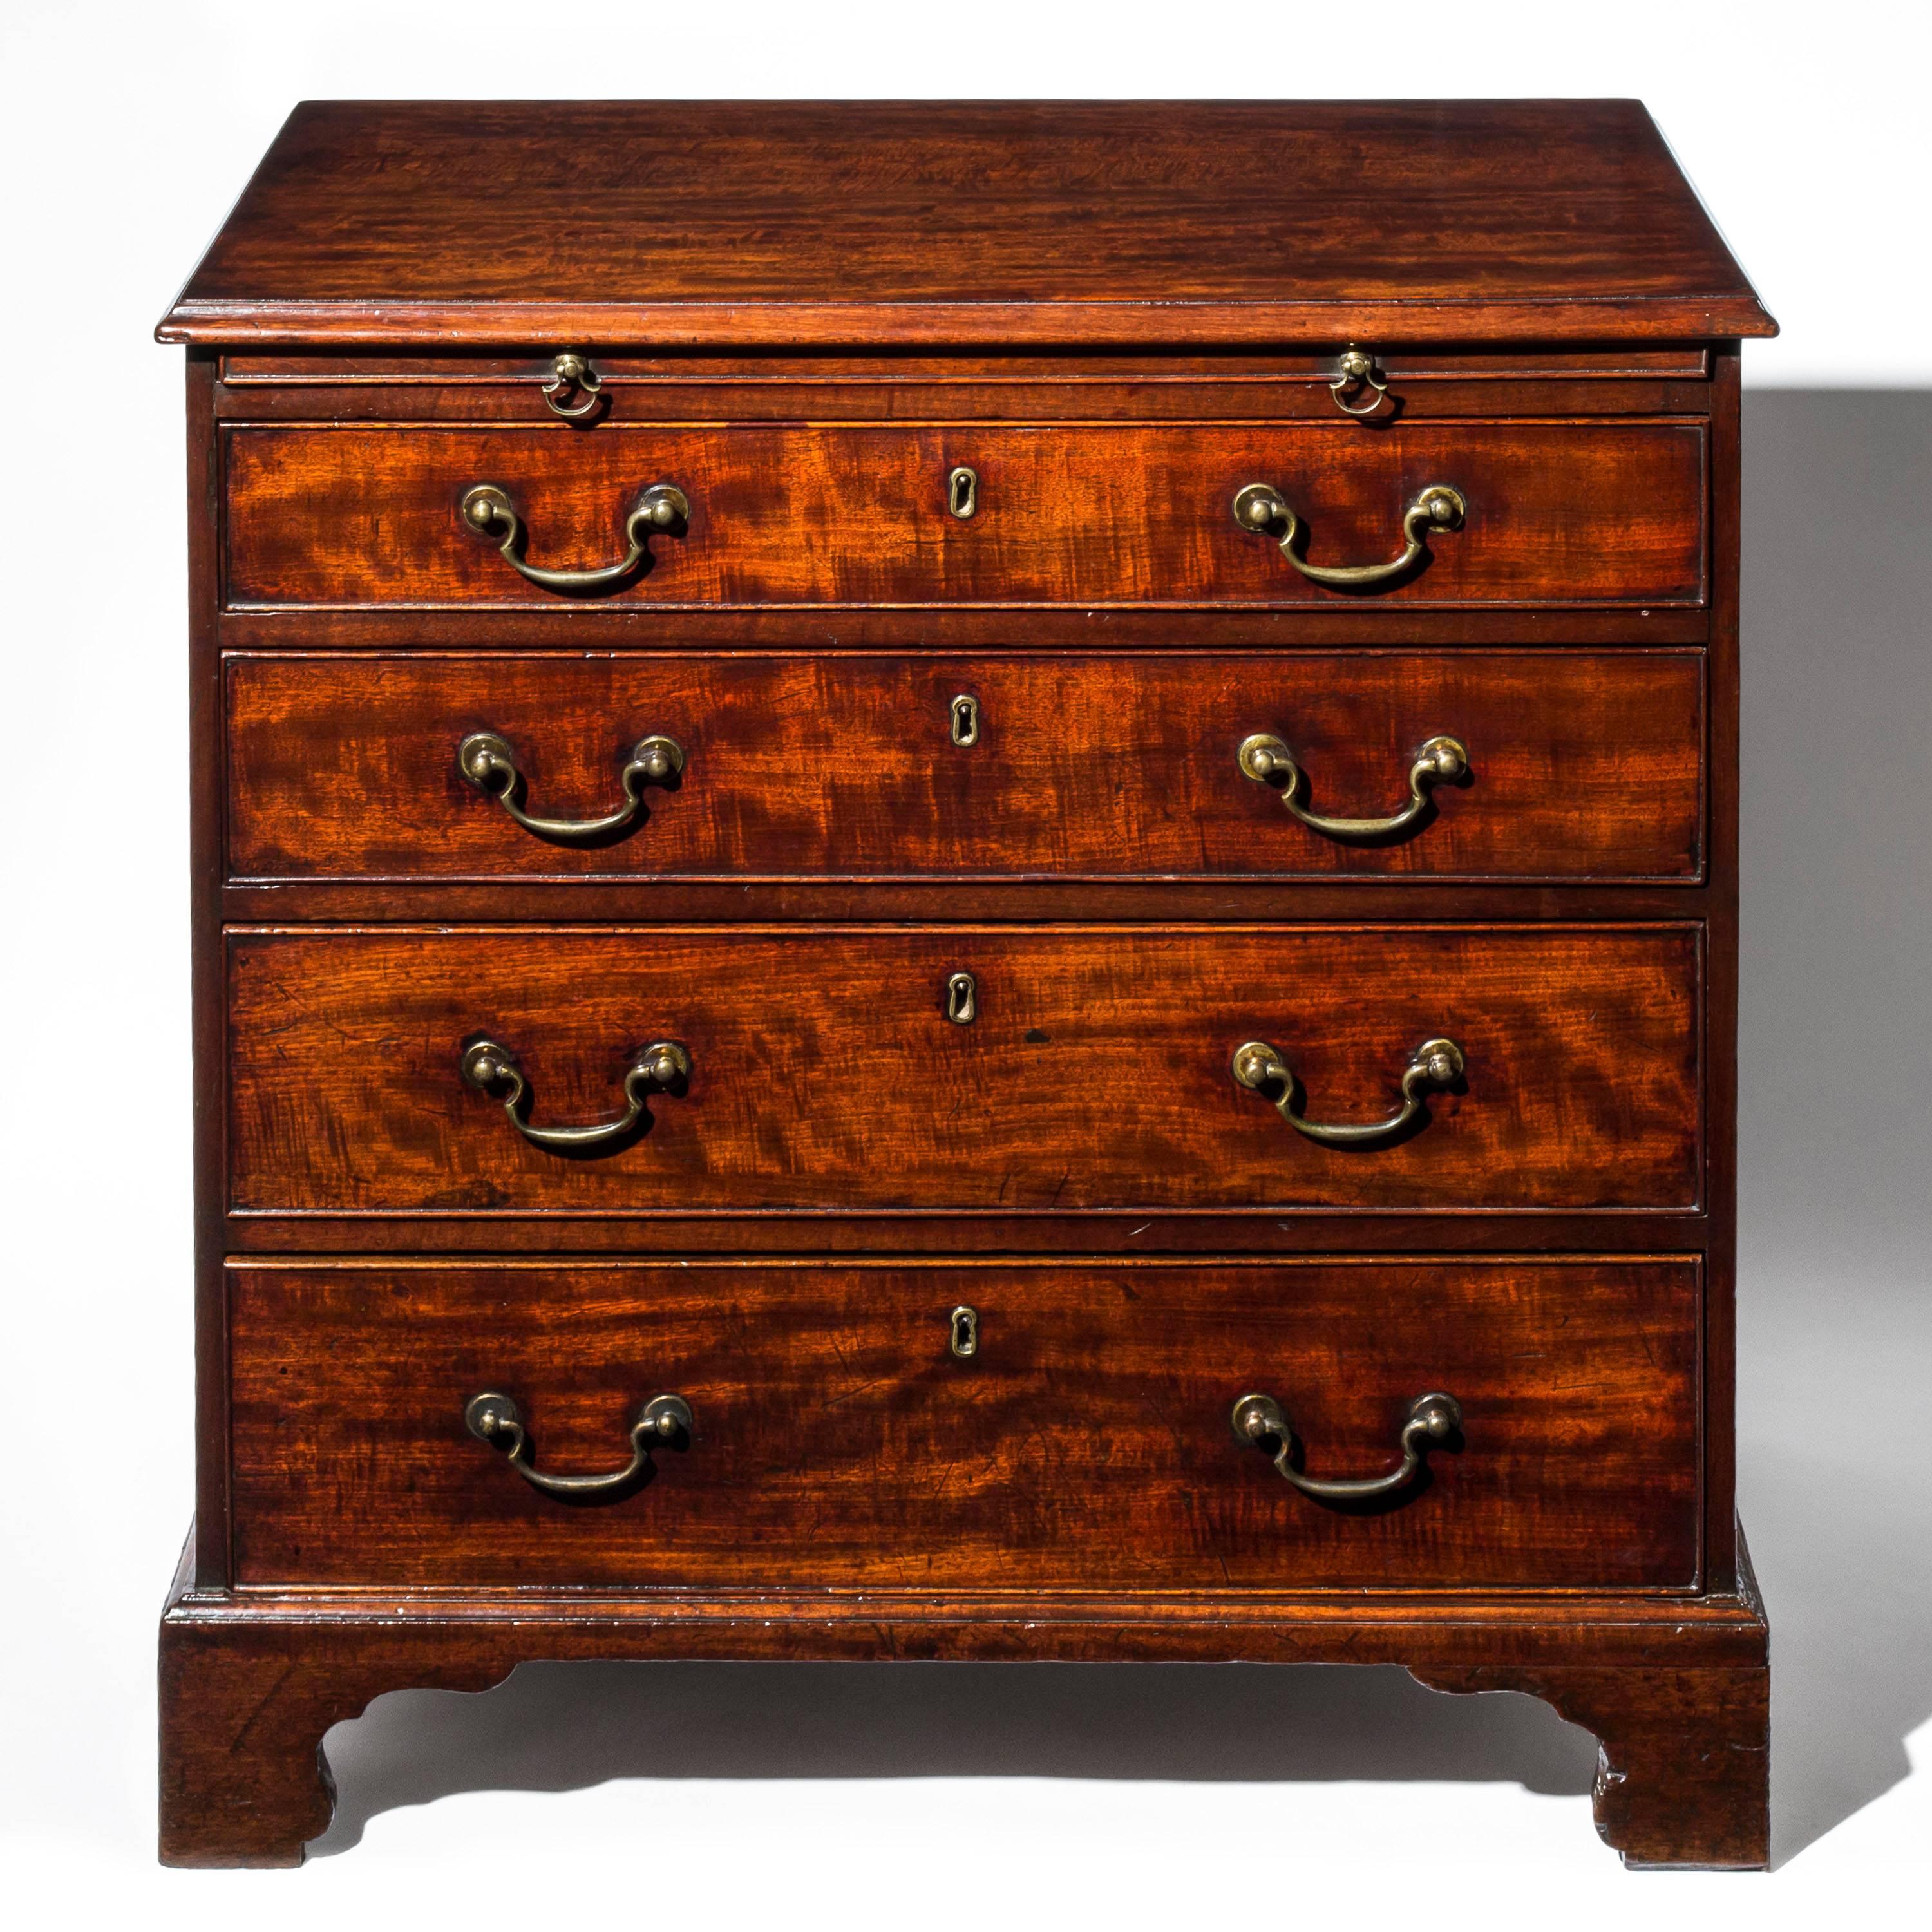 A fine English George III Chippendale period chest of drawers, of pleasing color and desirable compact proportions

circa 1770.

The rectangular top with applied moulded edge, over a brushing slide with brass axe head pull handles, above an